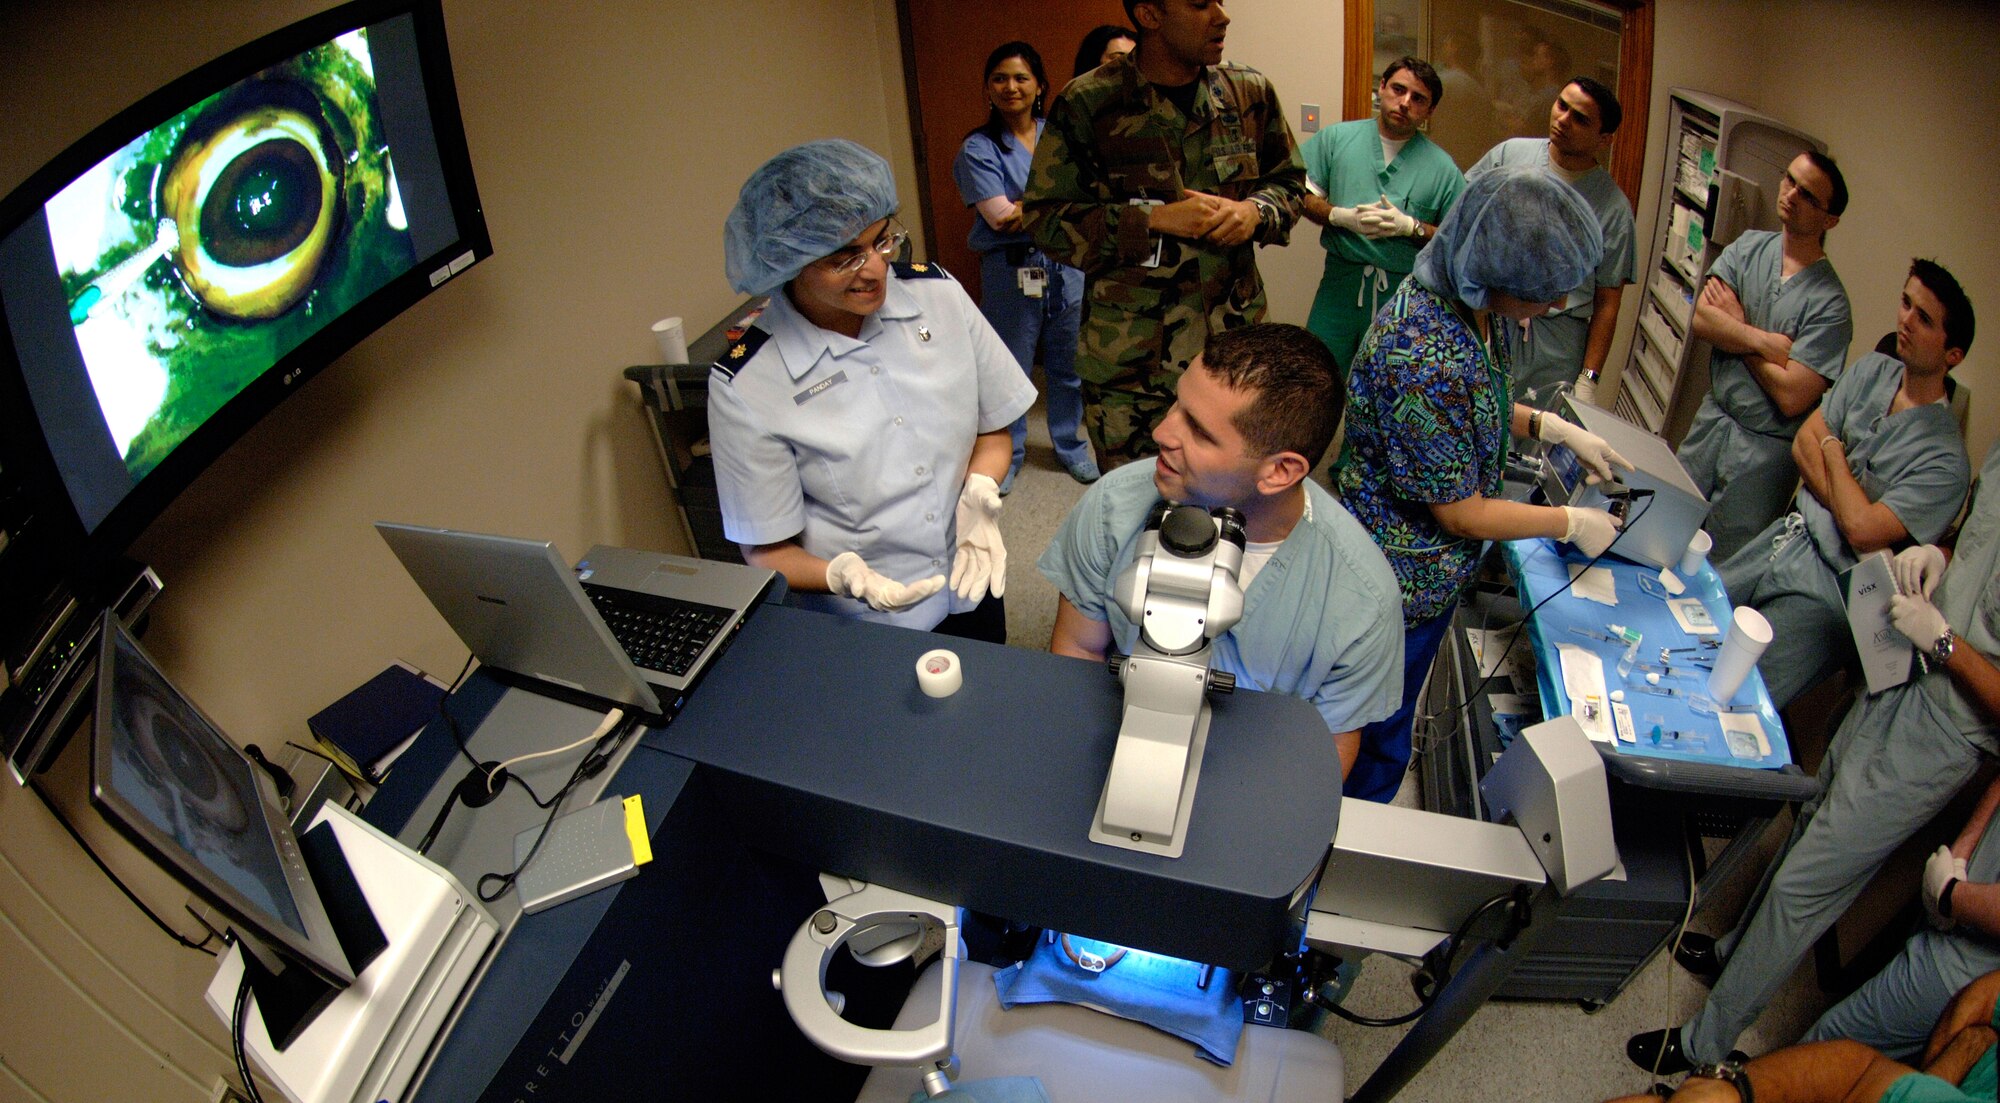 Maj. (Dr.) Vasudha Panday, ophthalmologist in the 59th Surgical Specialties Squadron (left), discusses using the a microkeratome, a precision cutting tool used during laser eye surgery, with ophthalmology resident Capt. (Dr.) Michael Parsons (center).  Excimer laser physician certification training was held at Lackland Air Force Base, Texas, May 9. (U.S. Air Force photo/Master Sgt. Kimberly A. Yearyean-Siers)